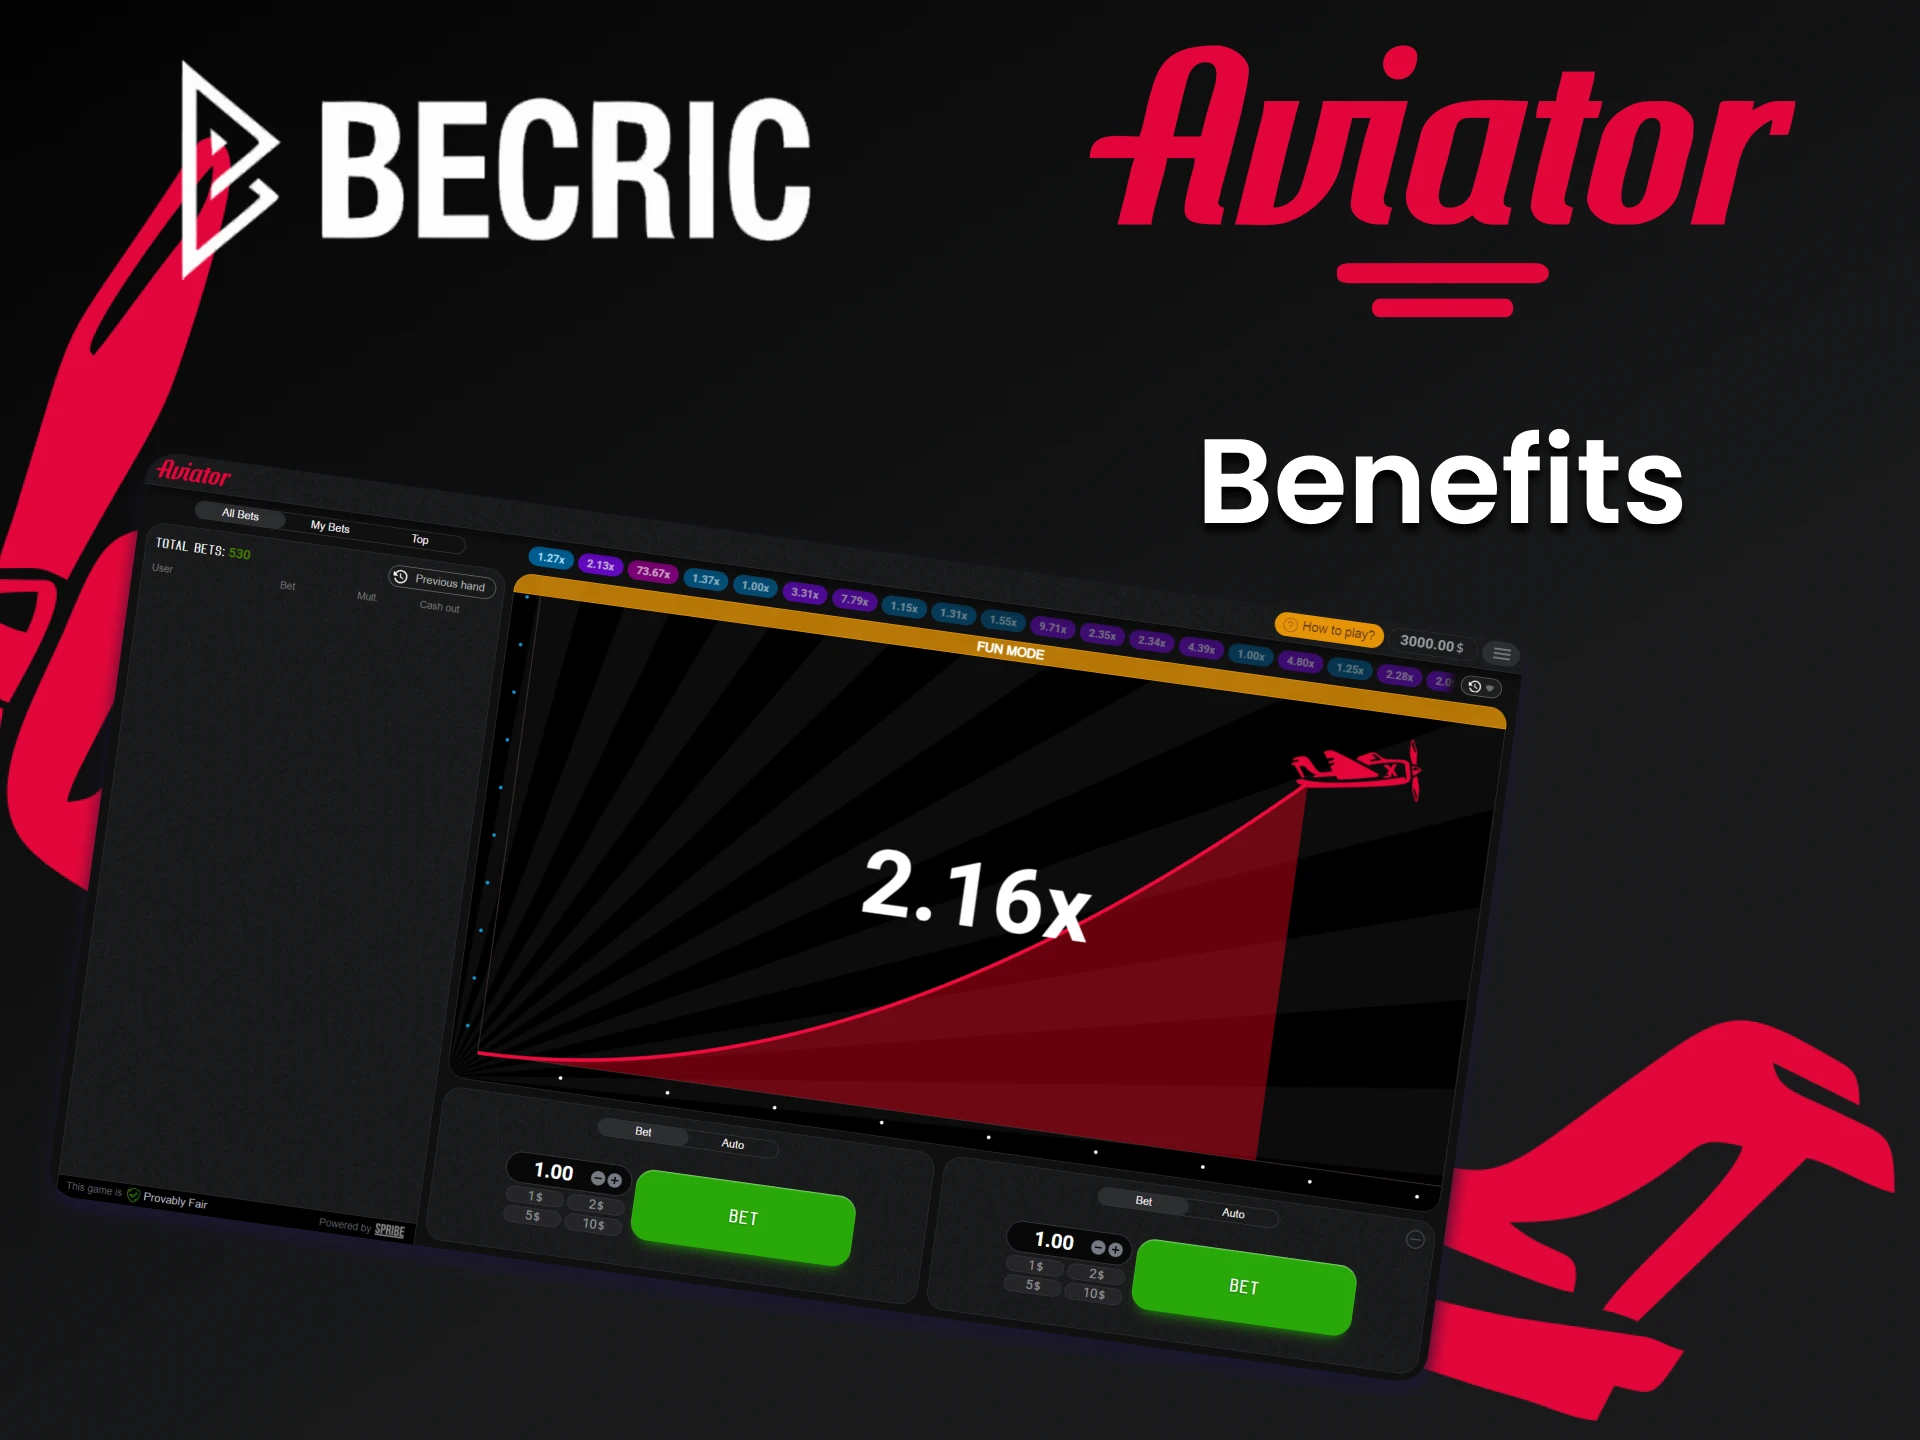 Choose to play Aviator site Becric.